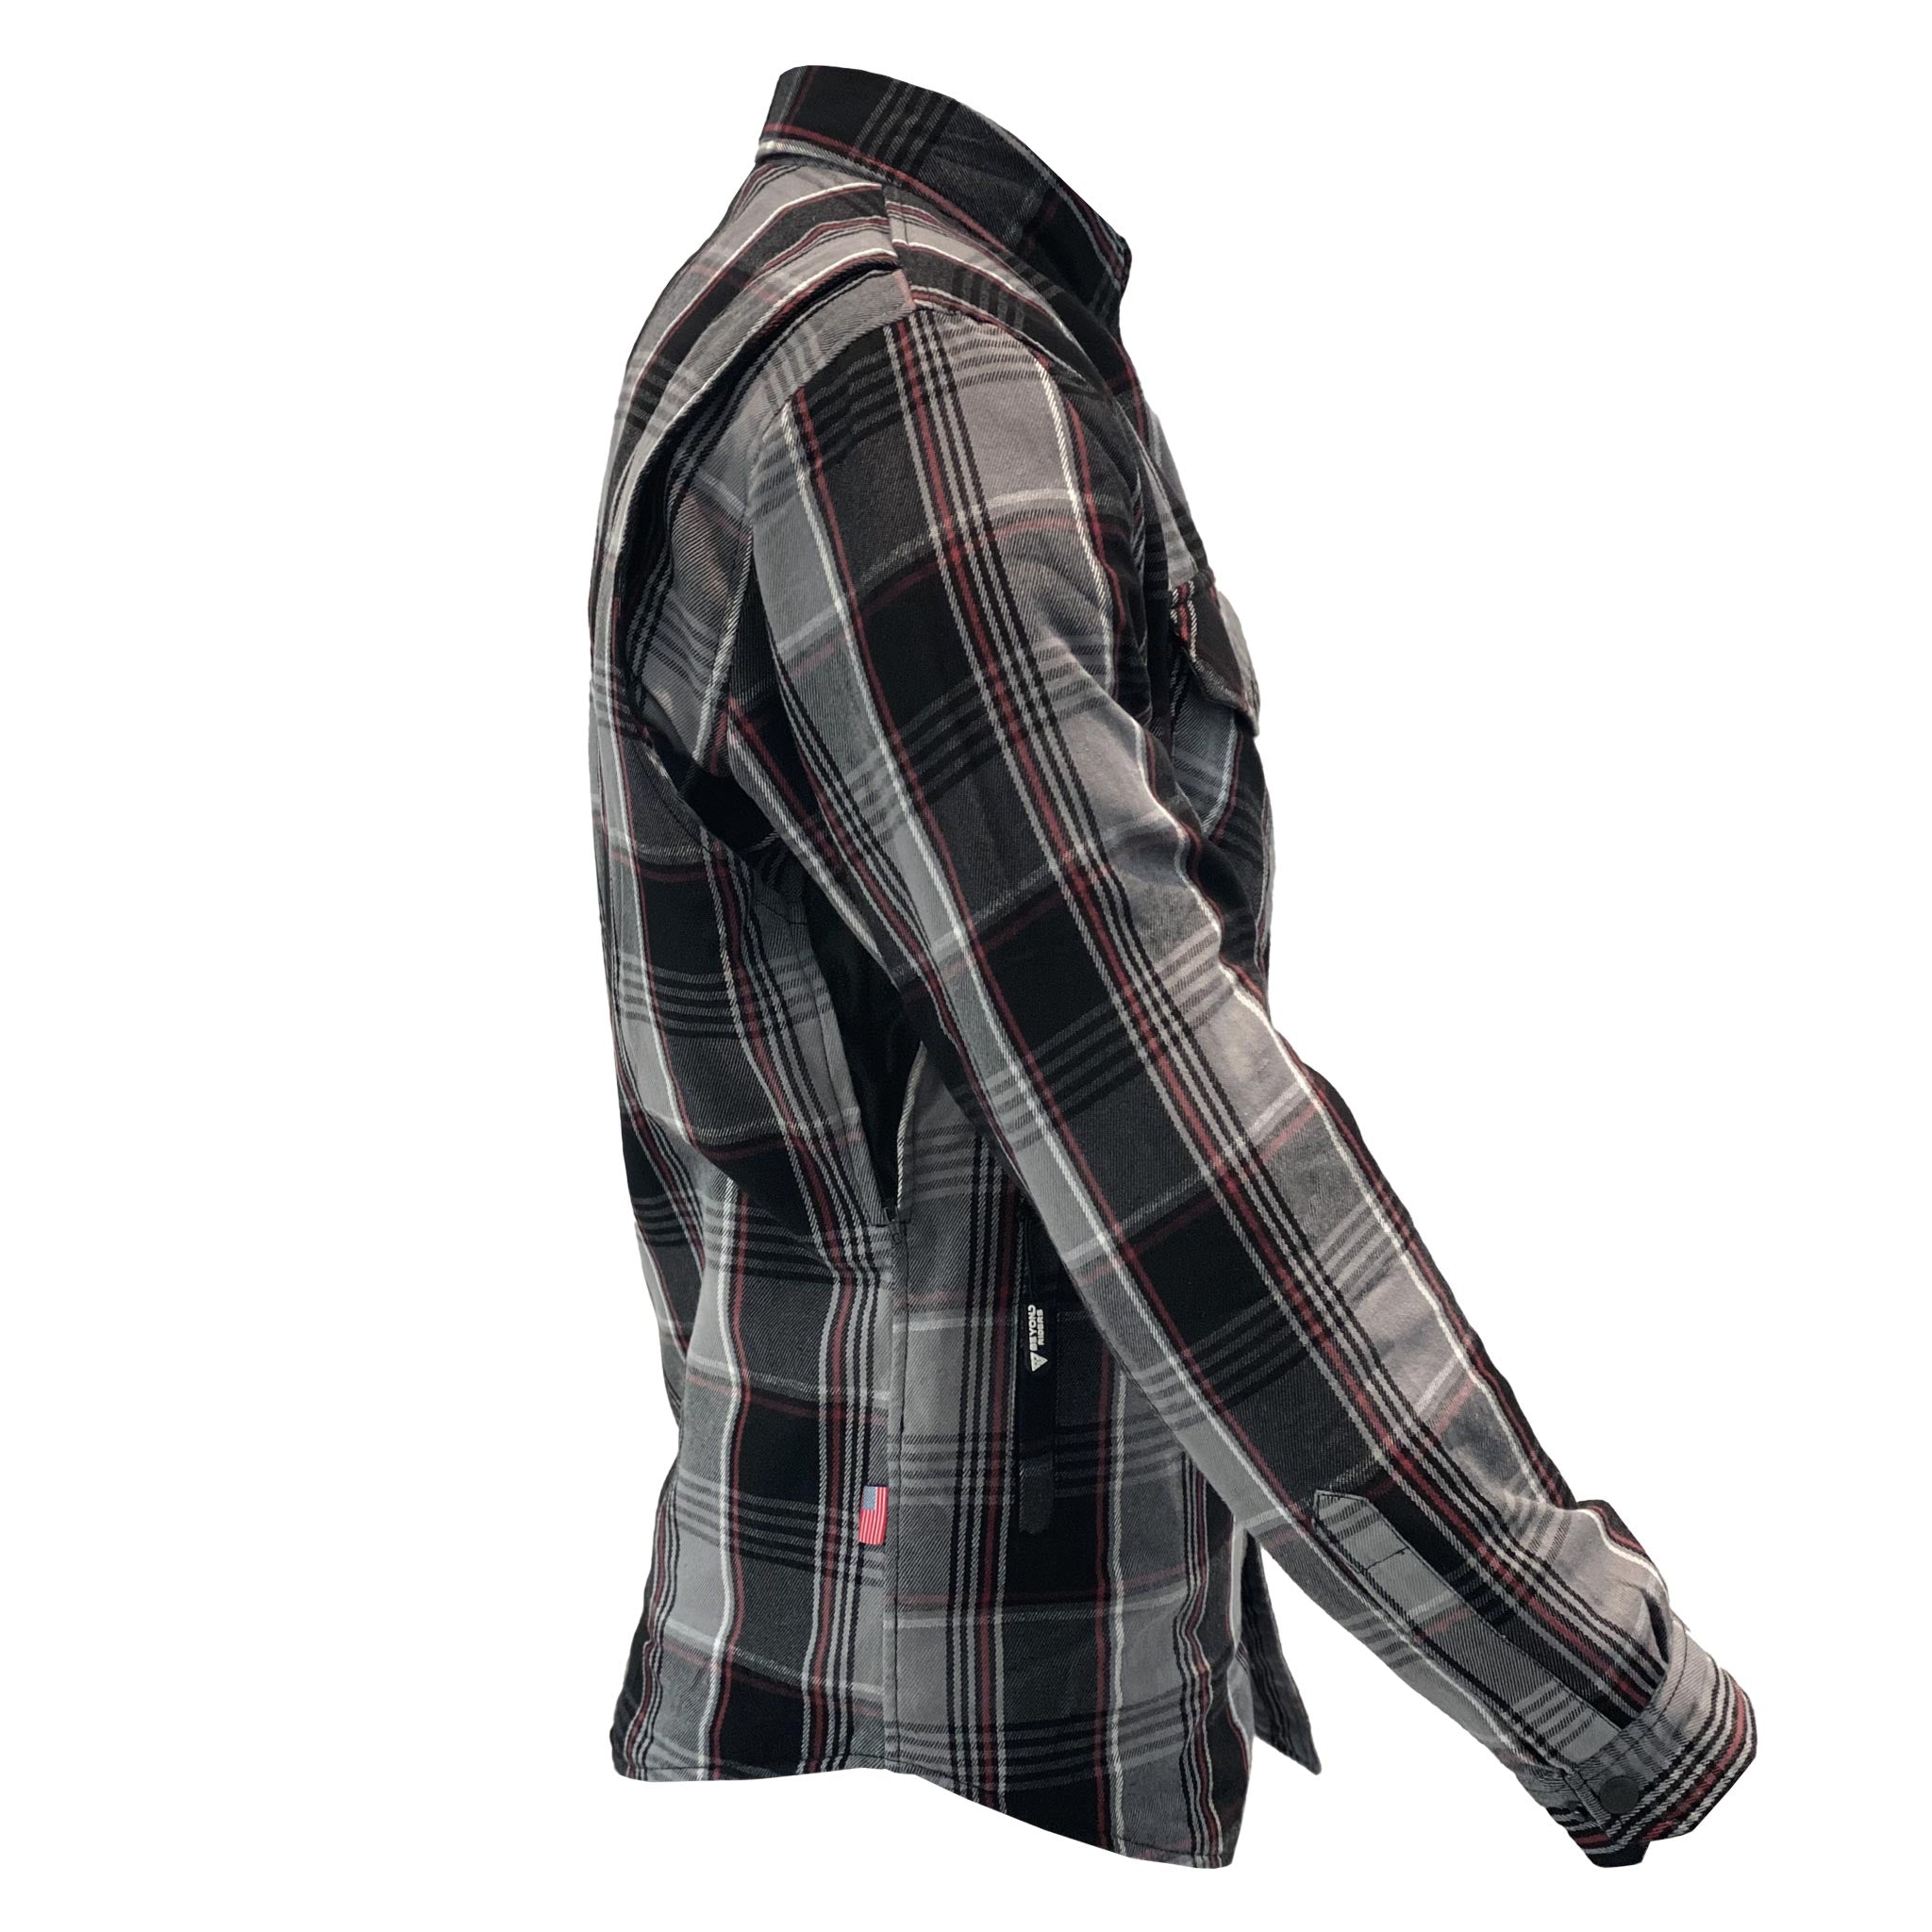 Protective Flannel Shirt For Men - Grey Black Red Checkered